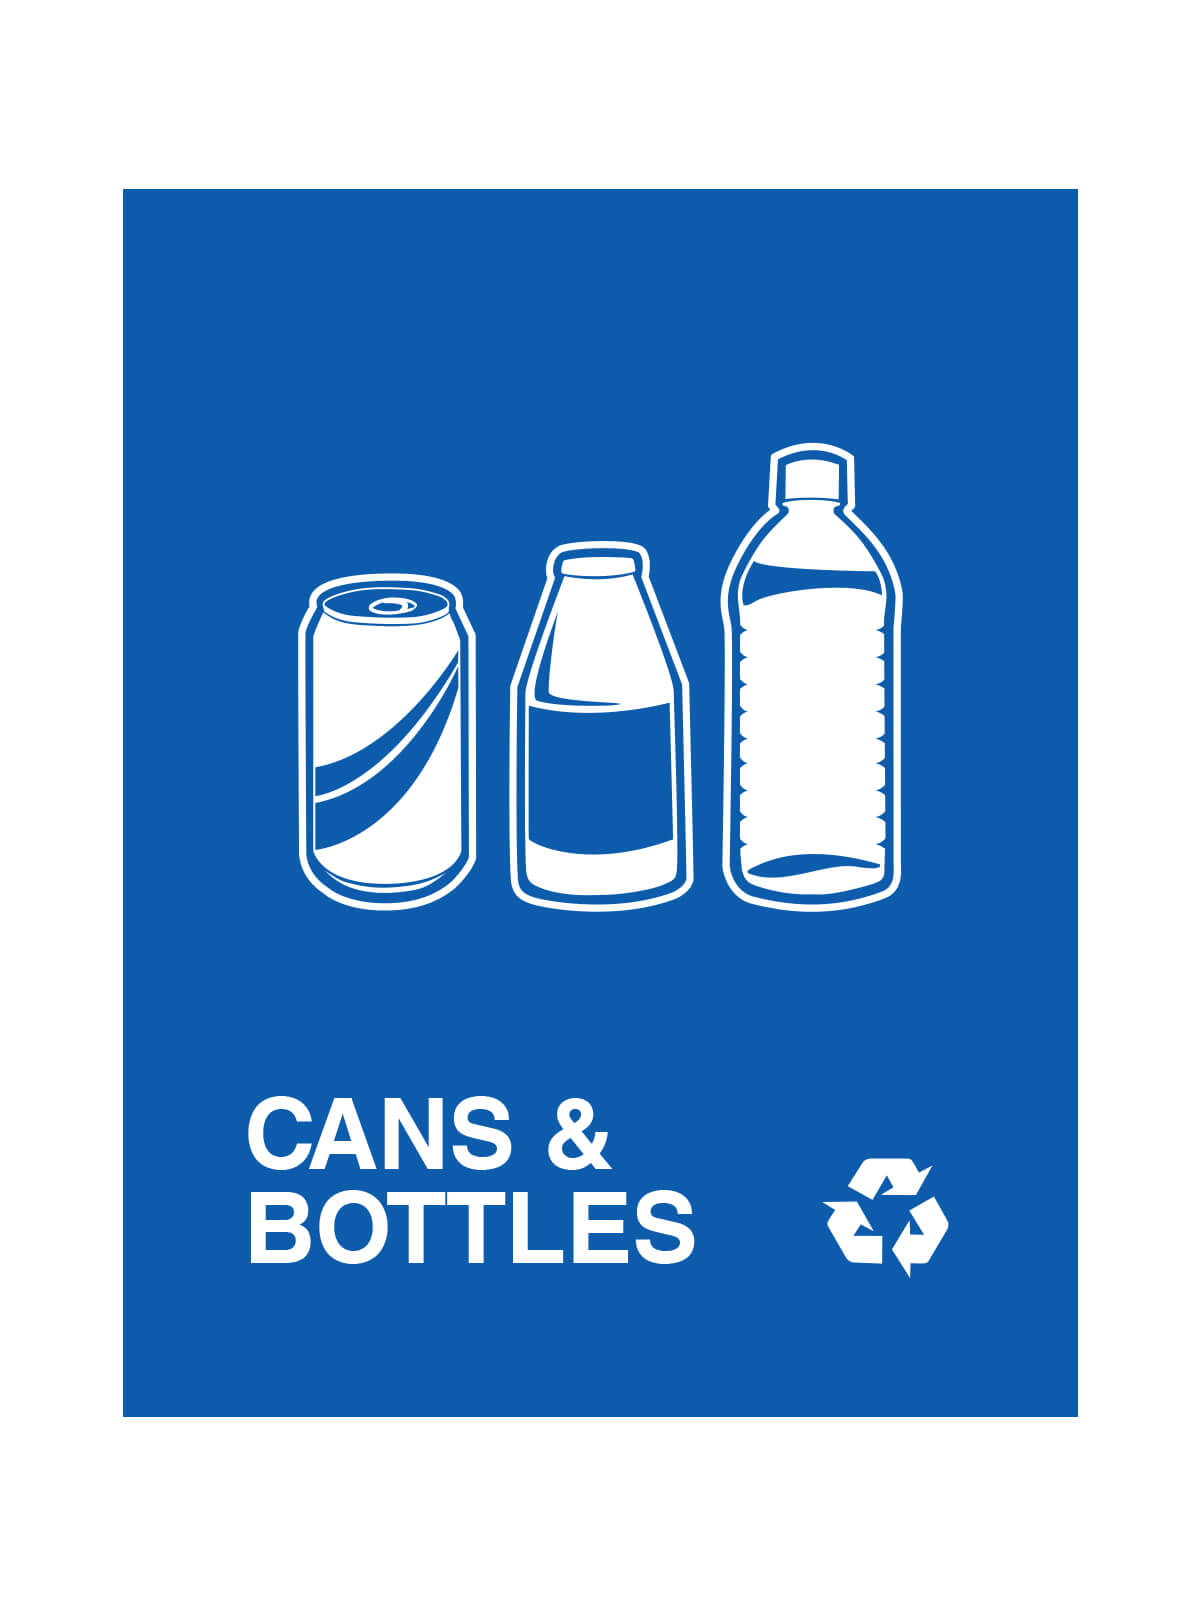 Cans and bottles illustration in white against a royal blue background.